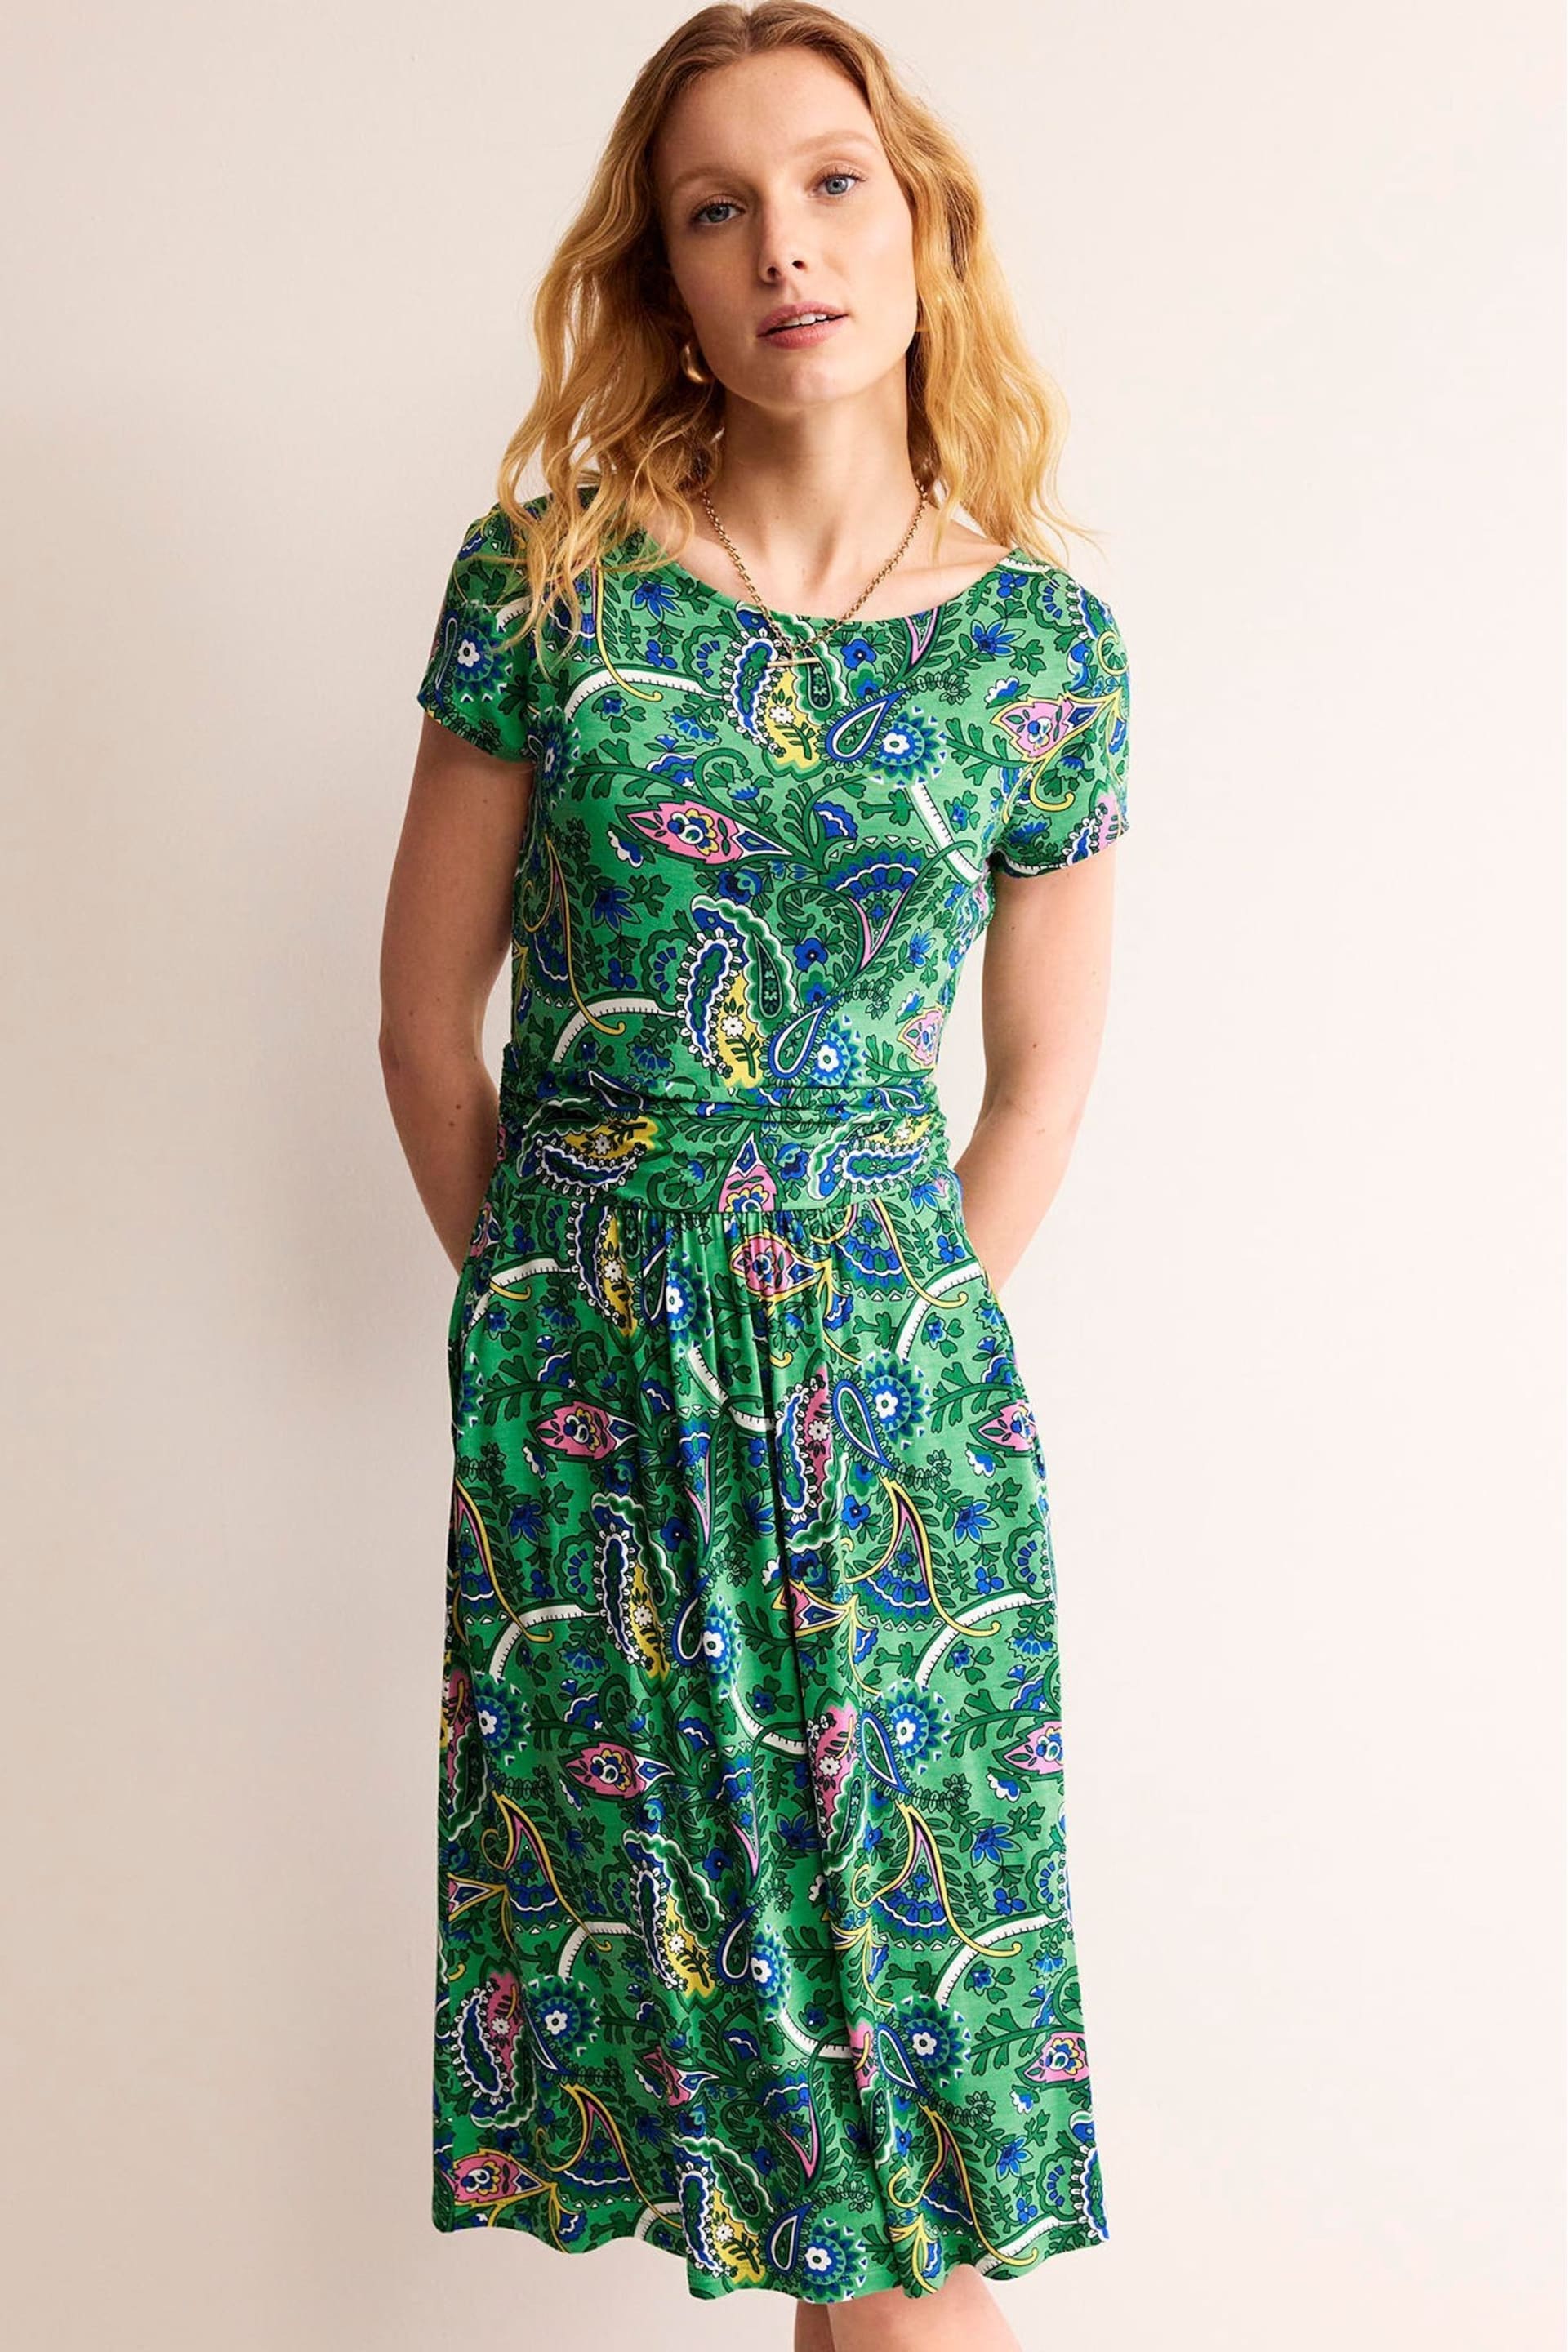 Boden Green Petite Amelie Jersey Dress - Image 4 of 5